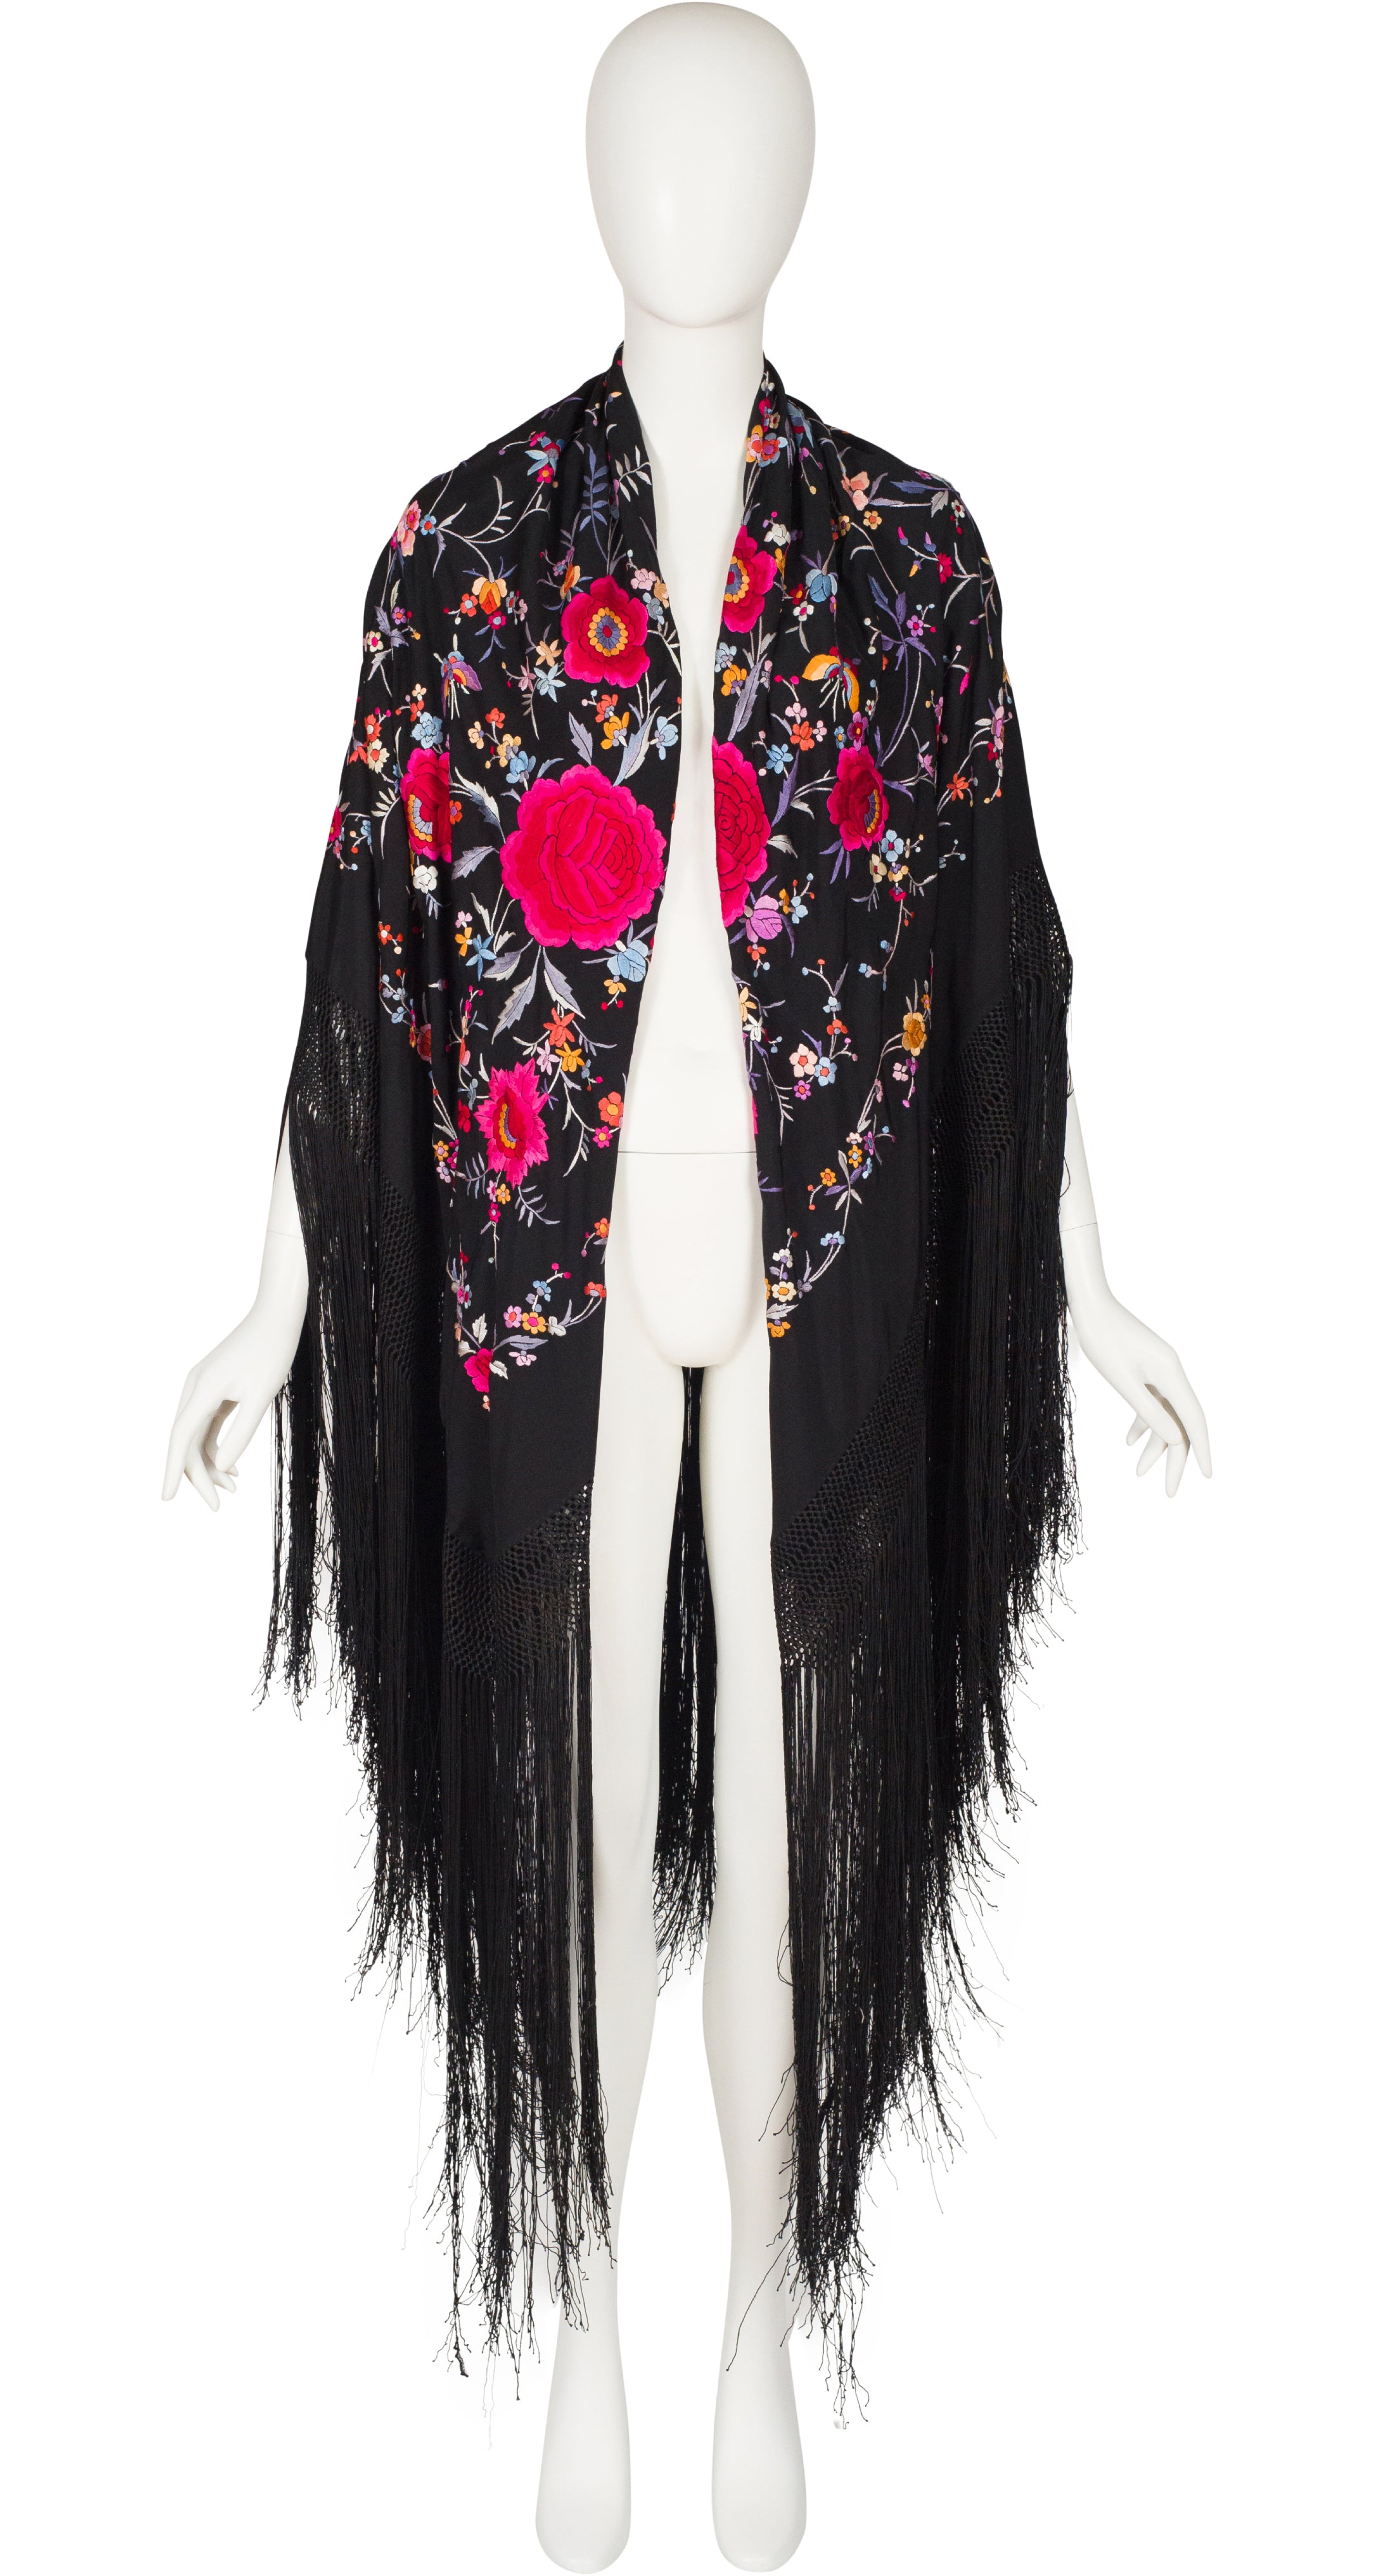 Art Deco Chinese Floral Embroidered Black Silk Fringe Shawl